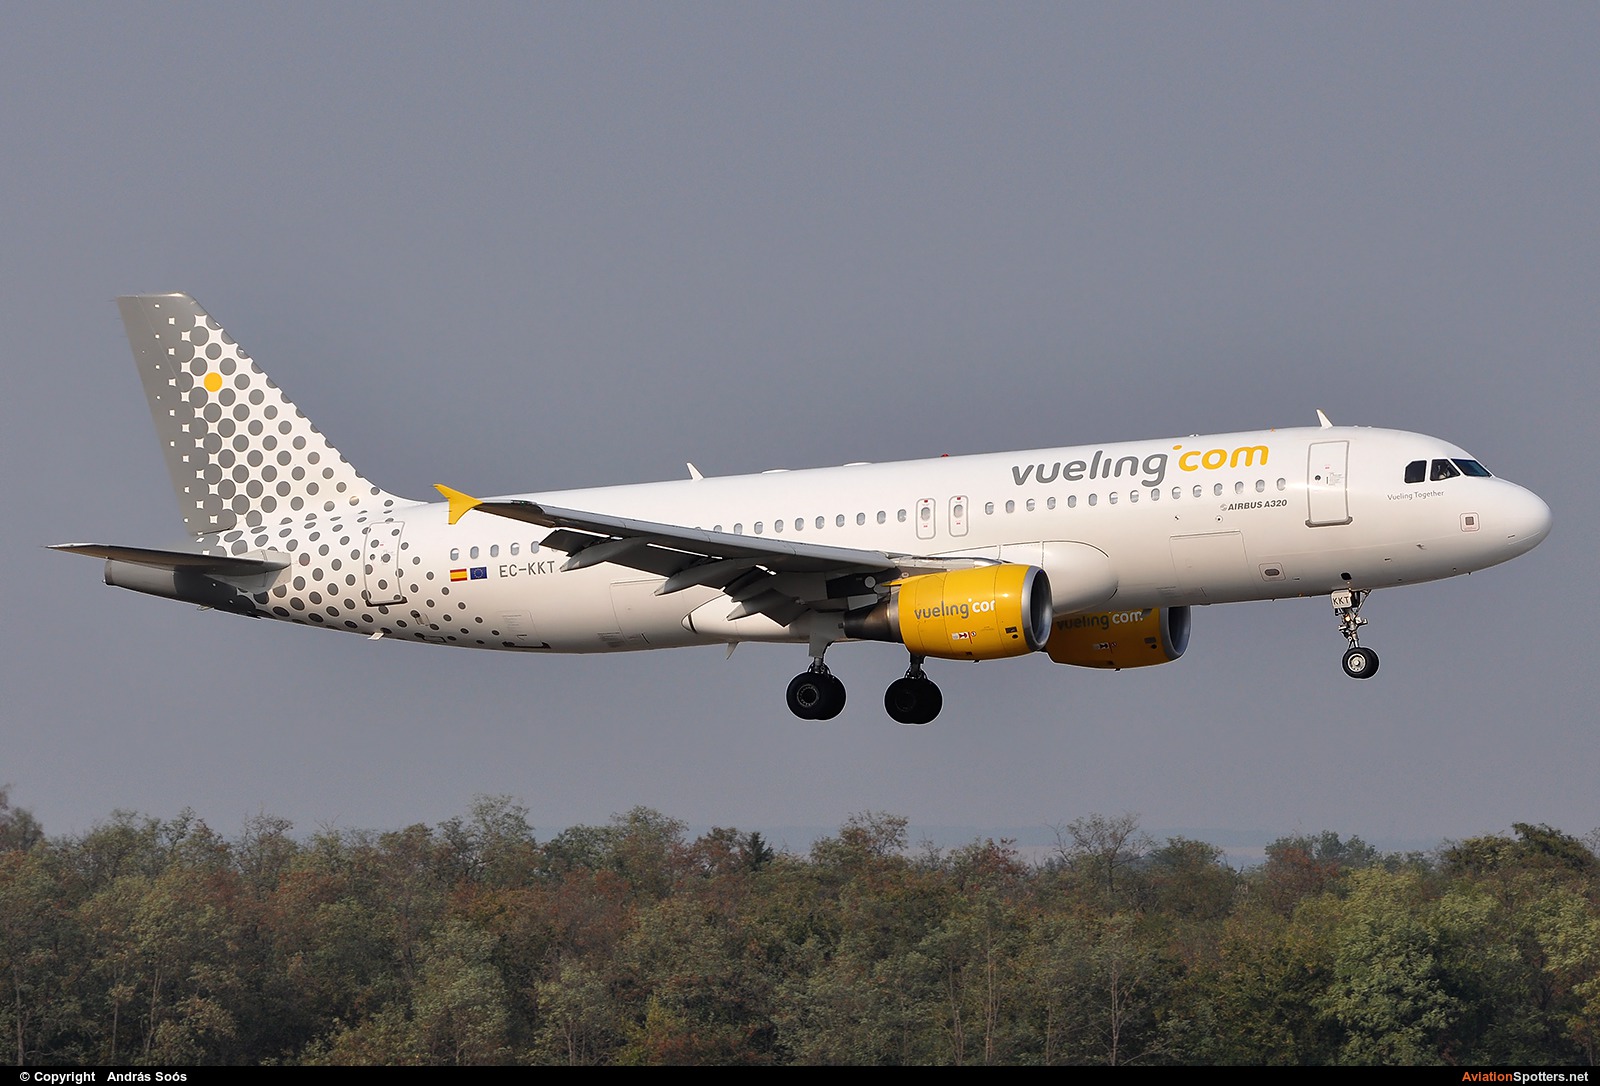 Vueling Airlines  -  A320  (EC-KKT) By András Soós (sas1965)